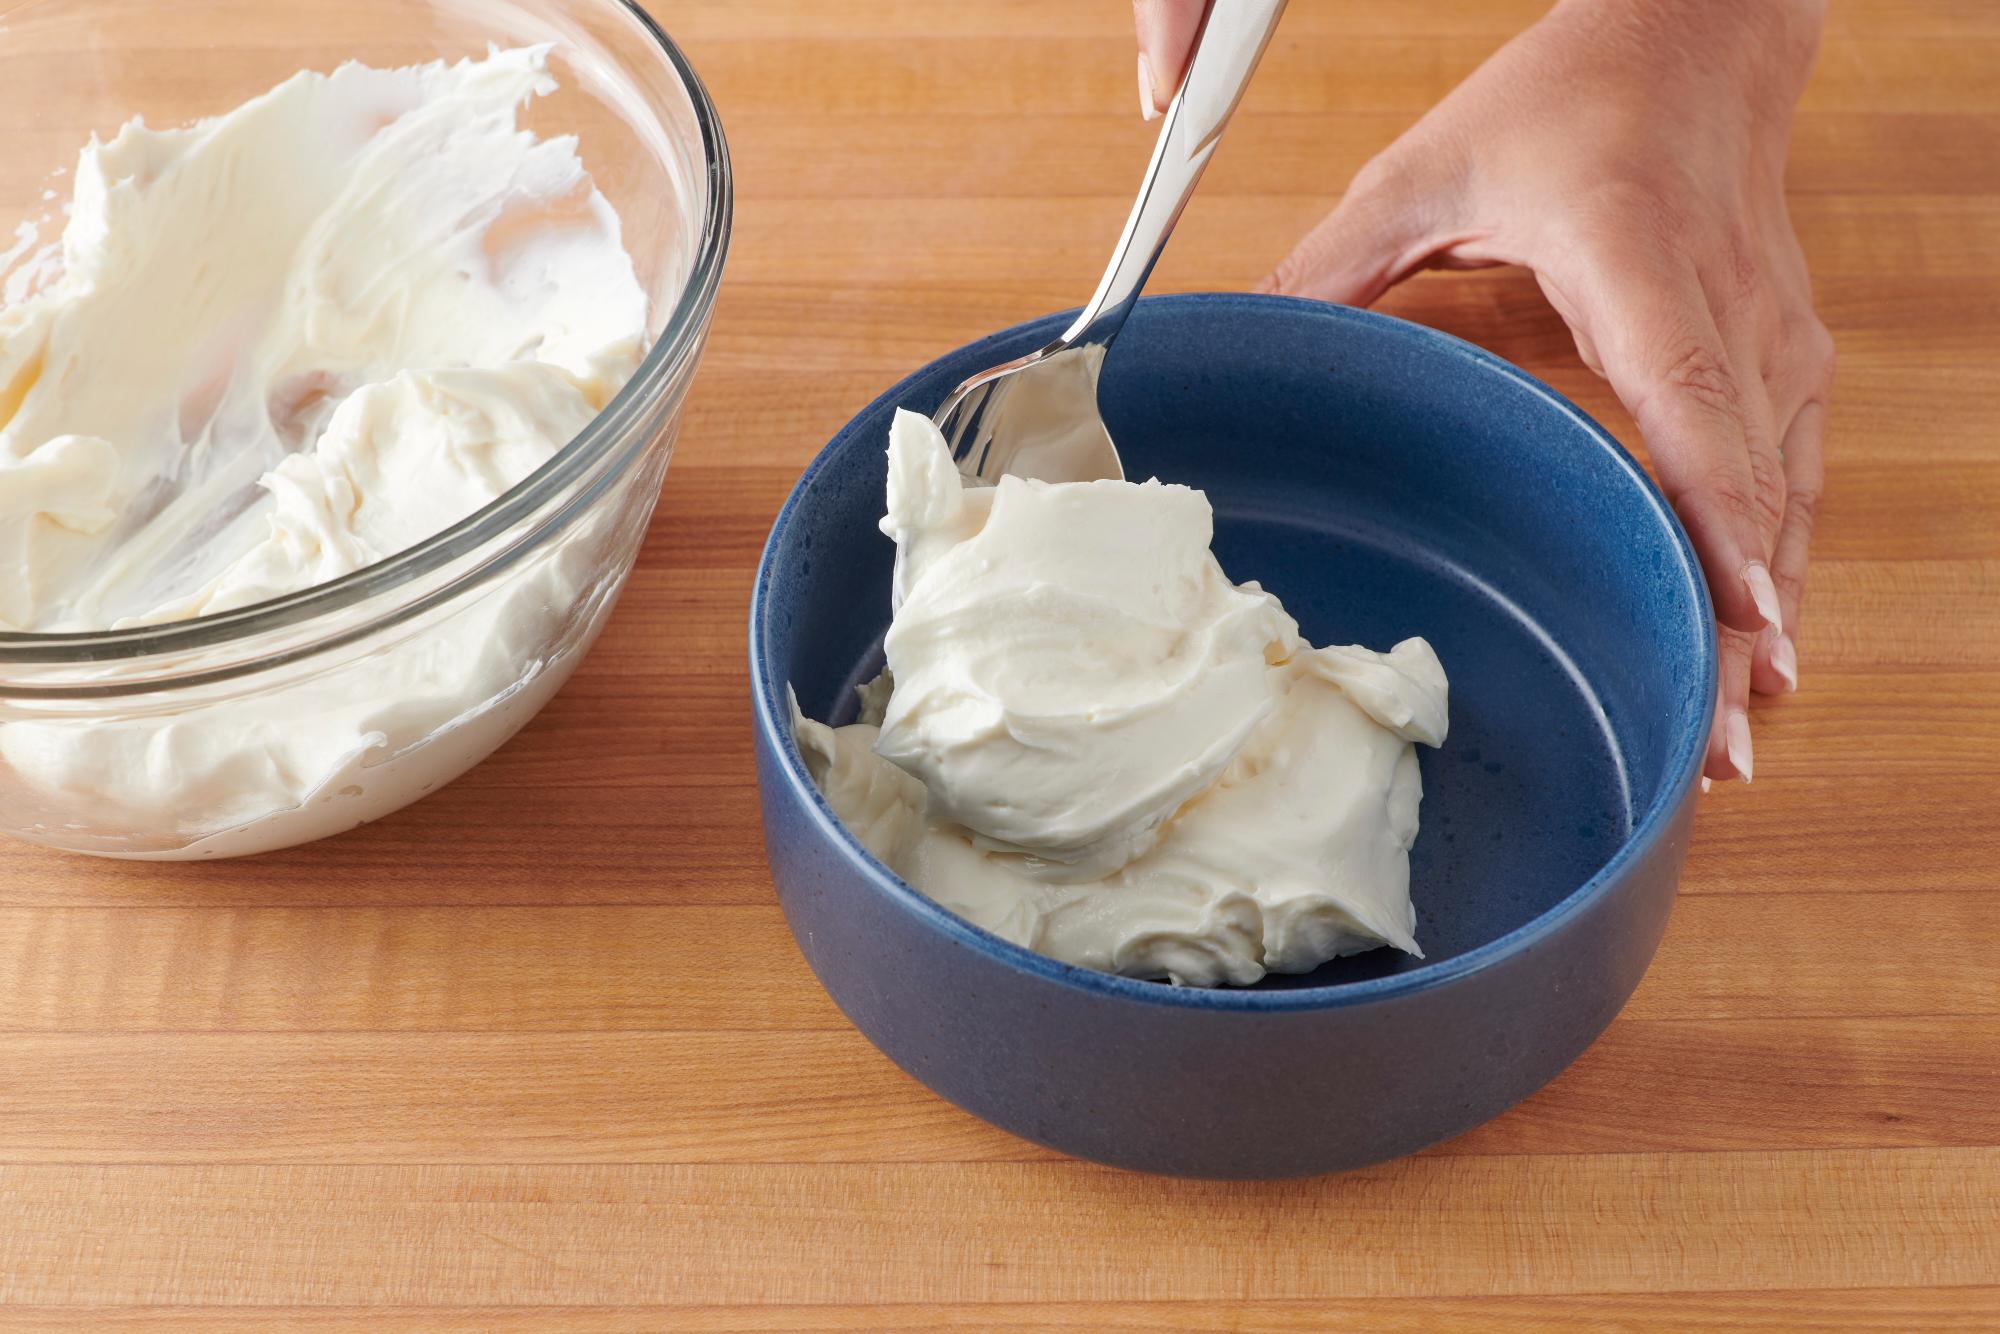 Spooning the cream cheese mixture into a dish.